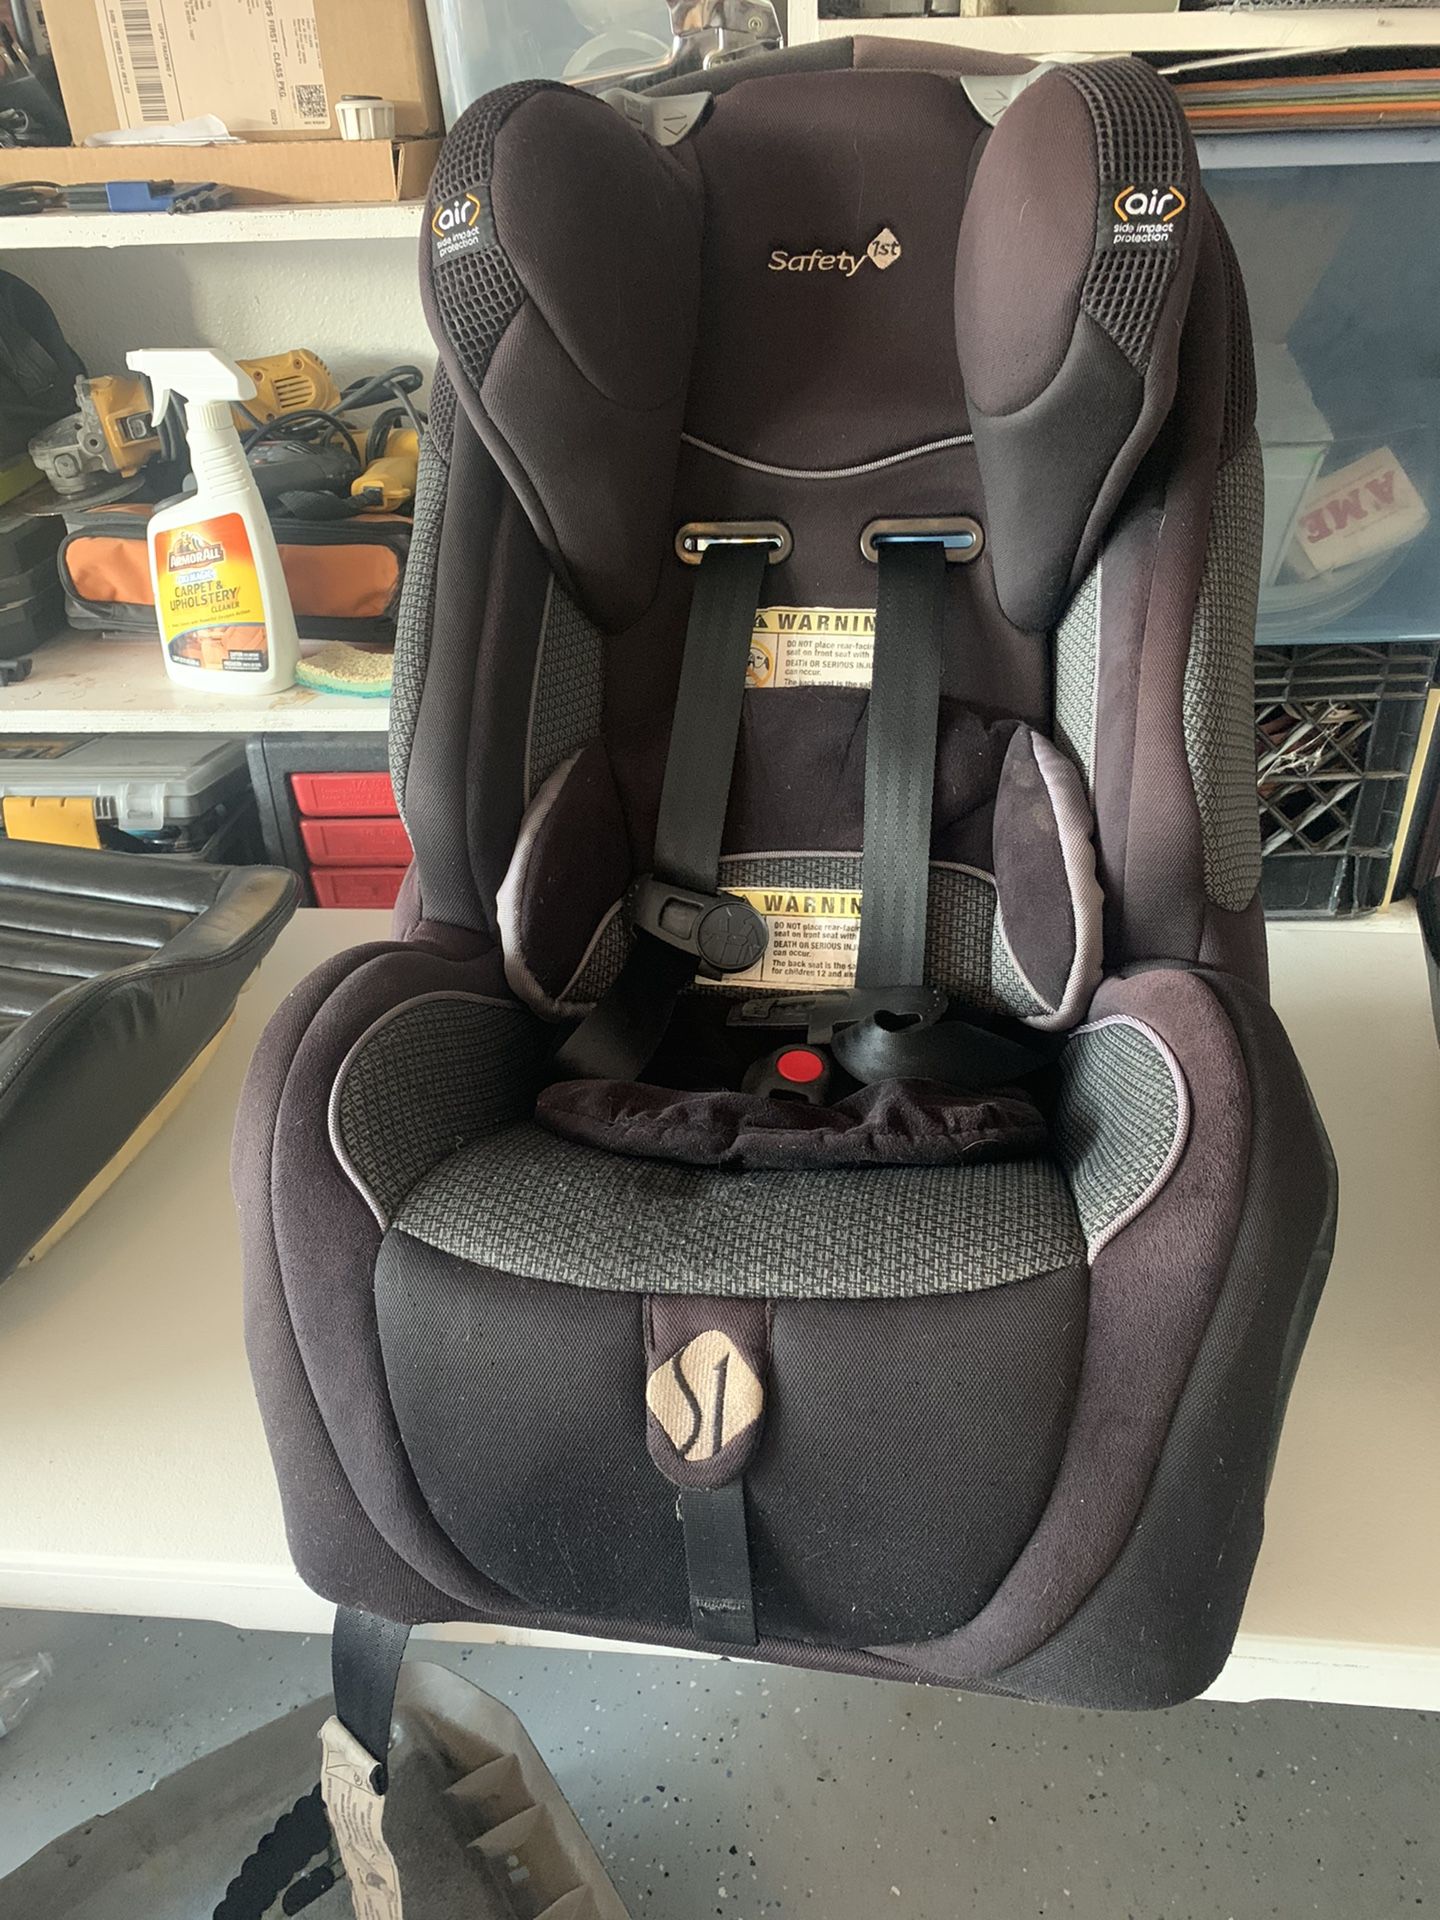 Safety 1st baby car seat